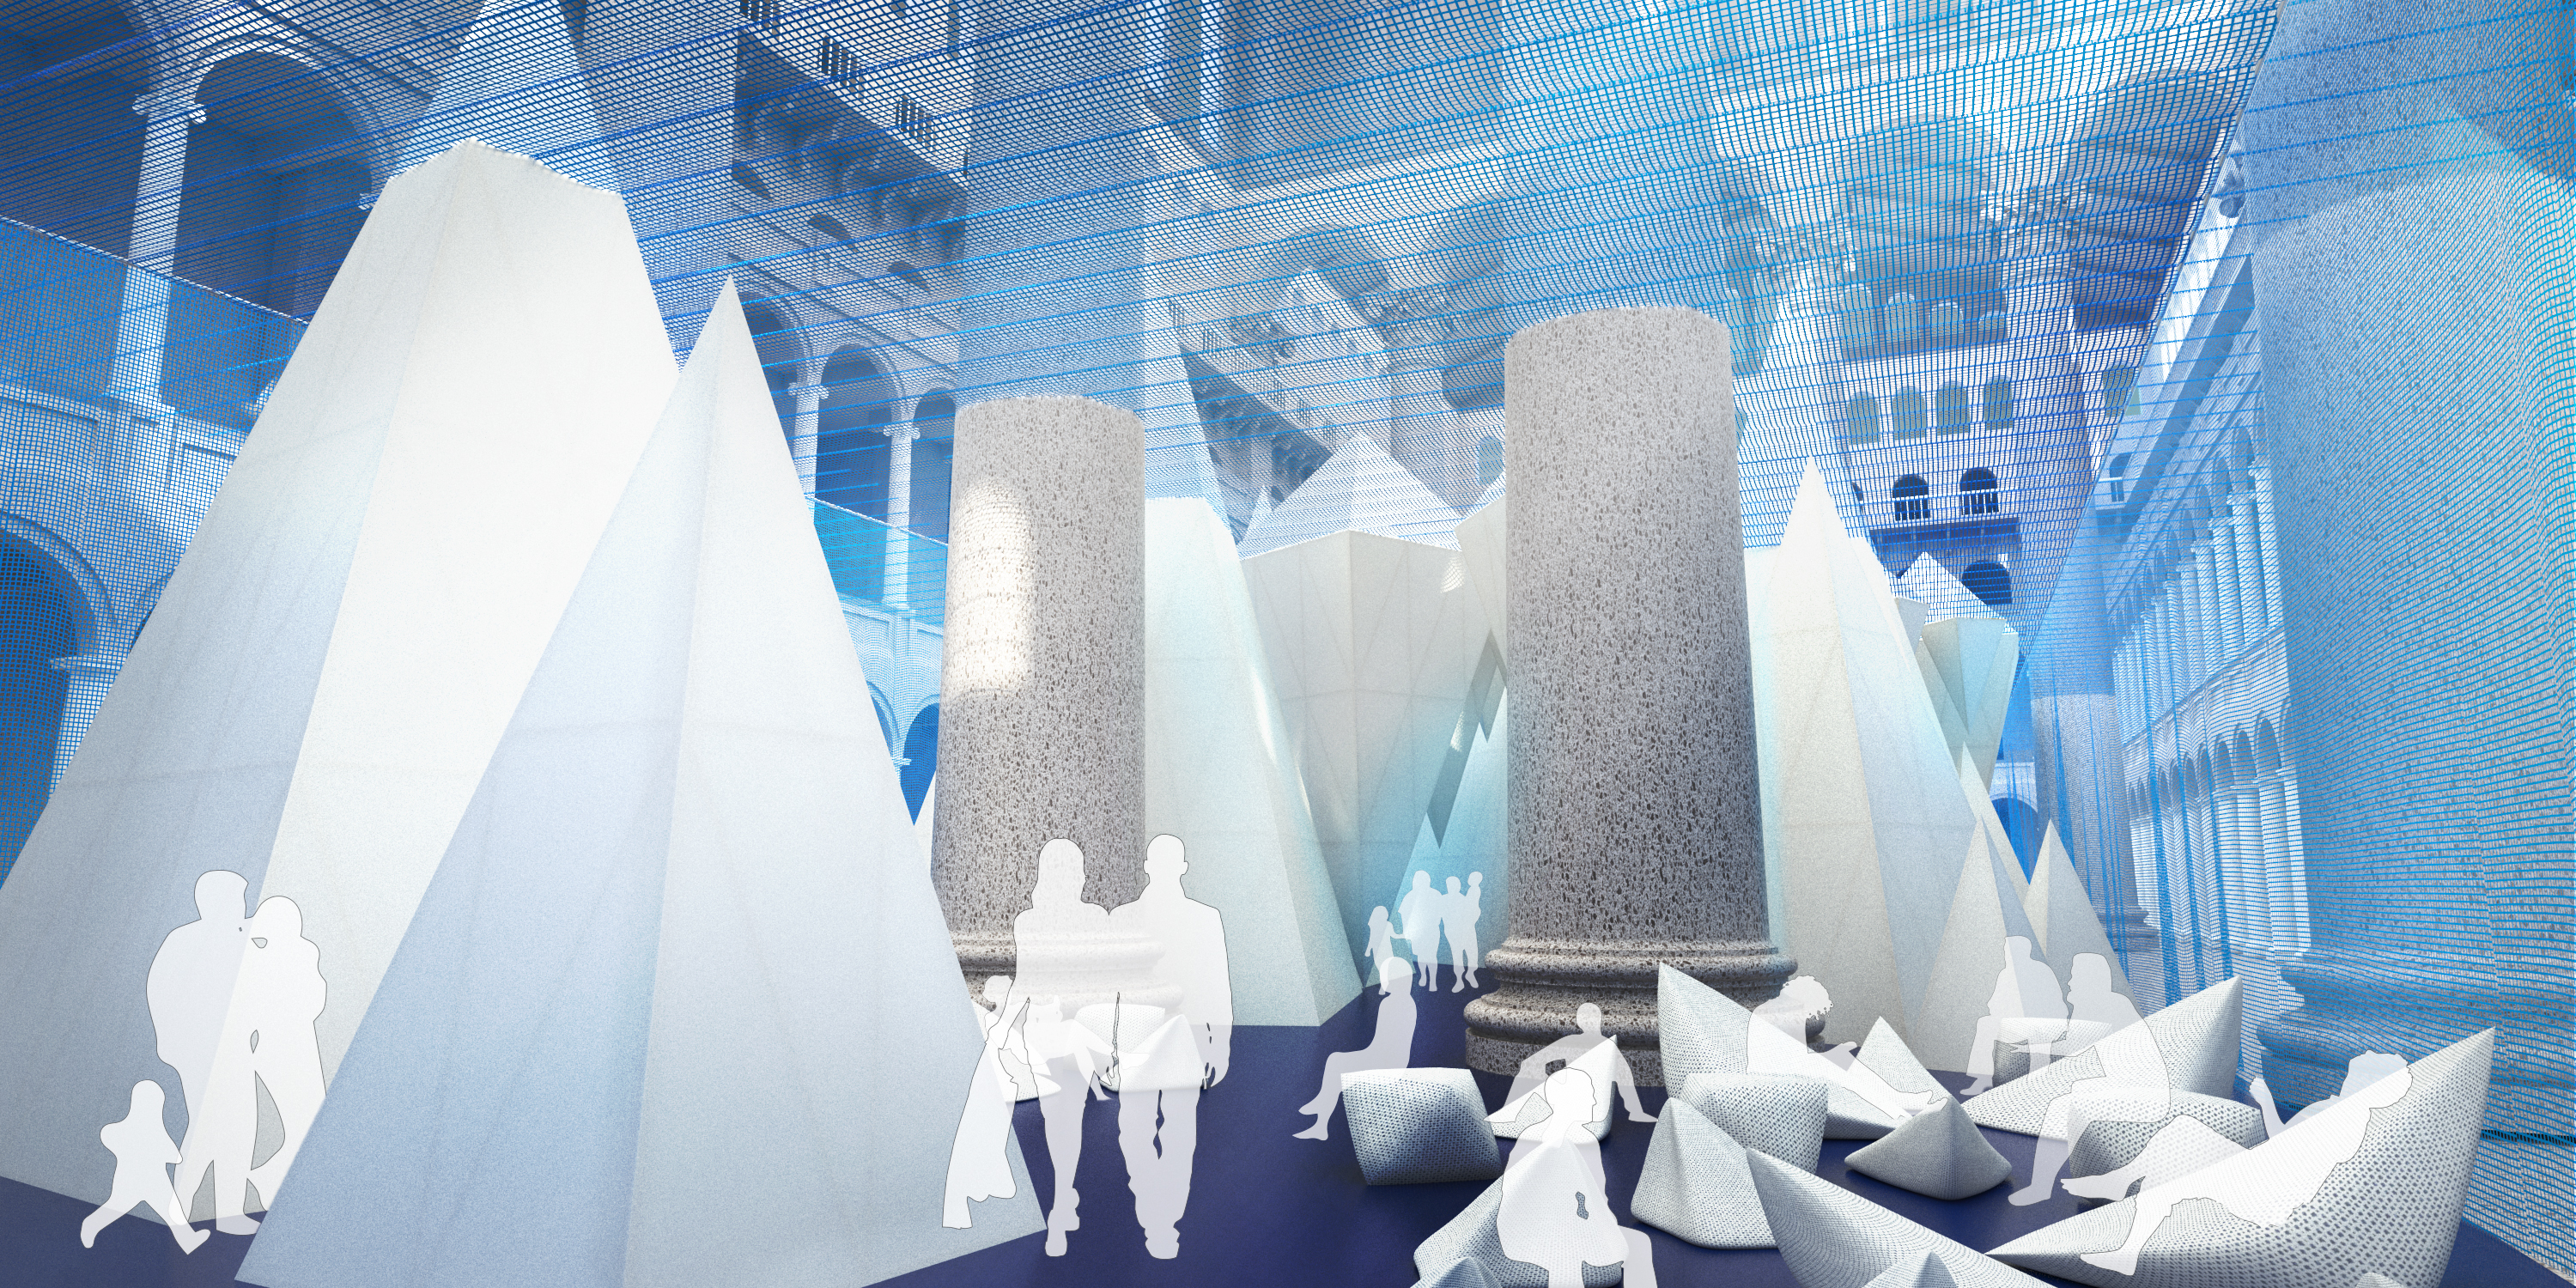 Review: “ICEBERGS” at Building Museum is Washington's worst ...